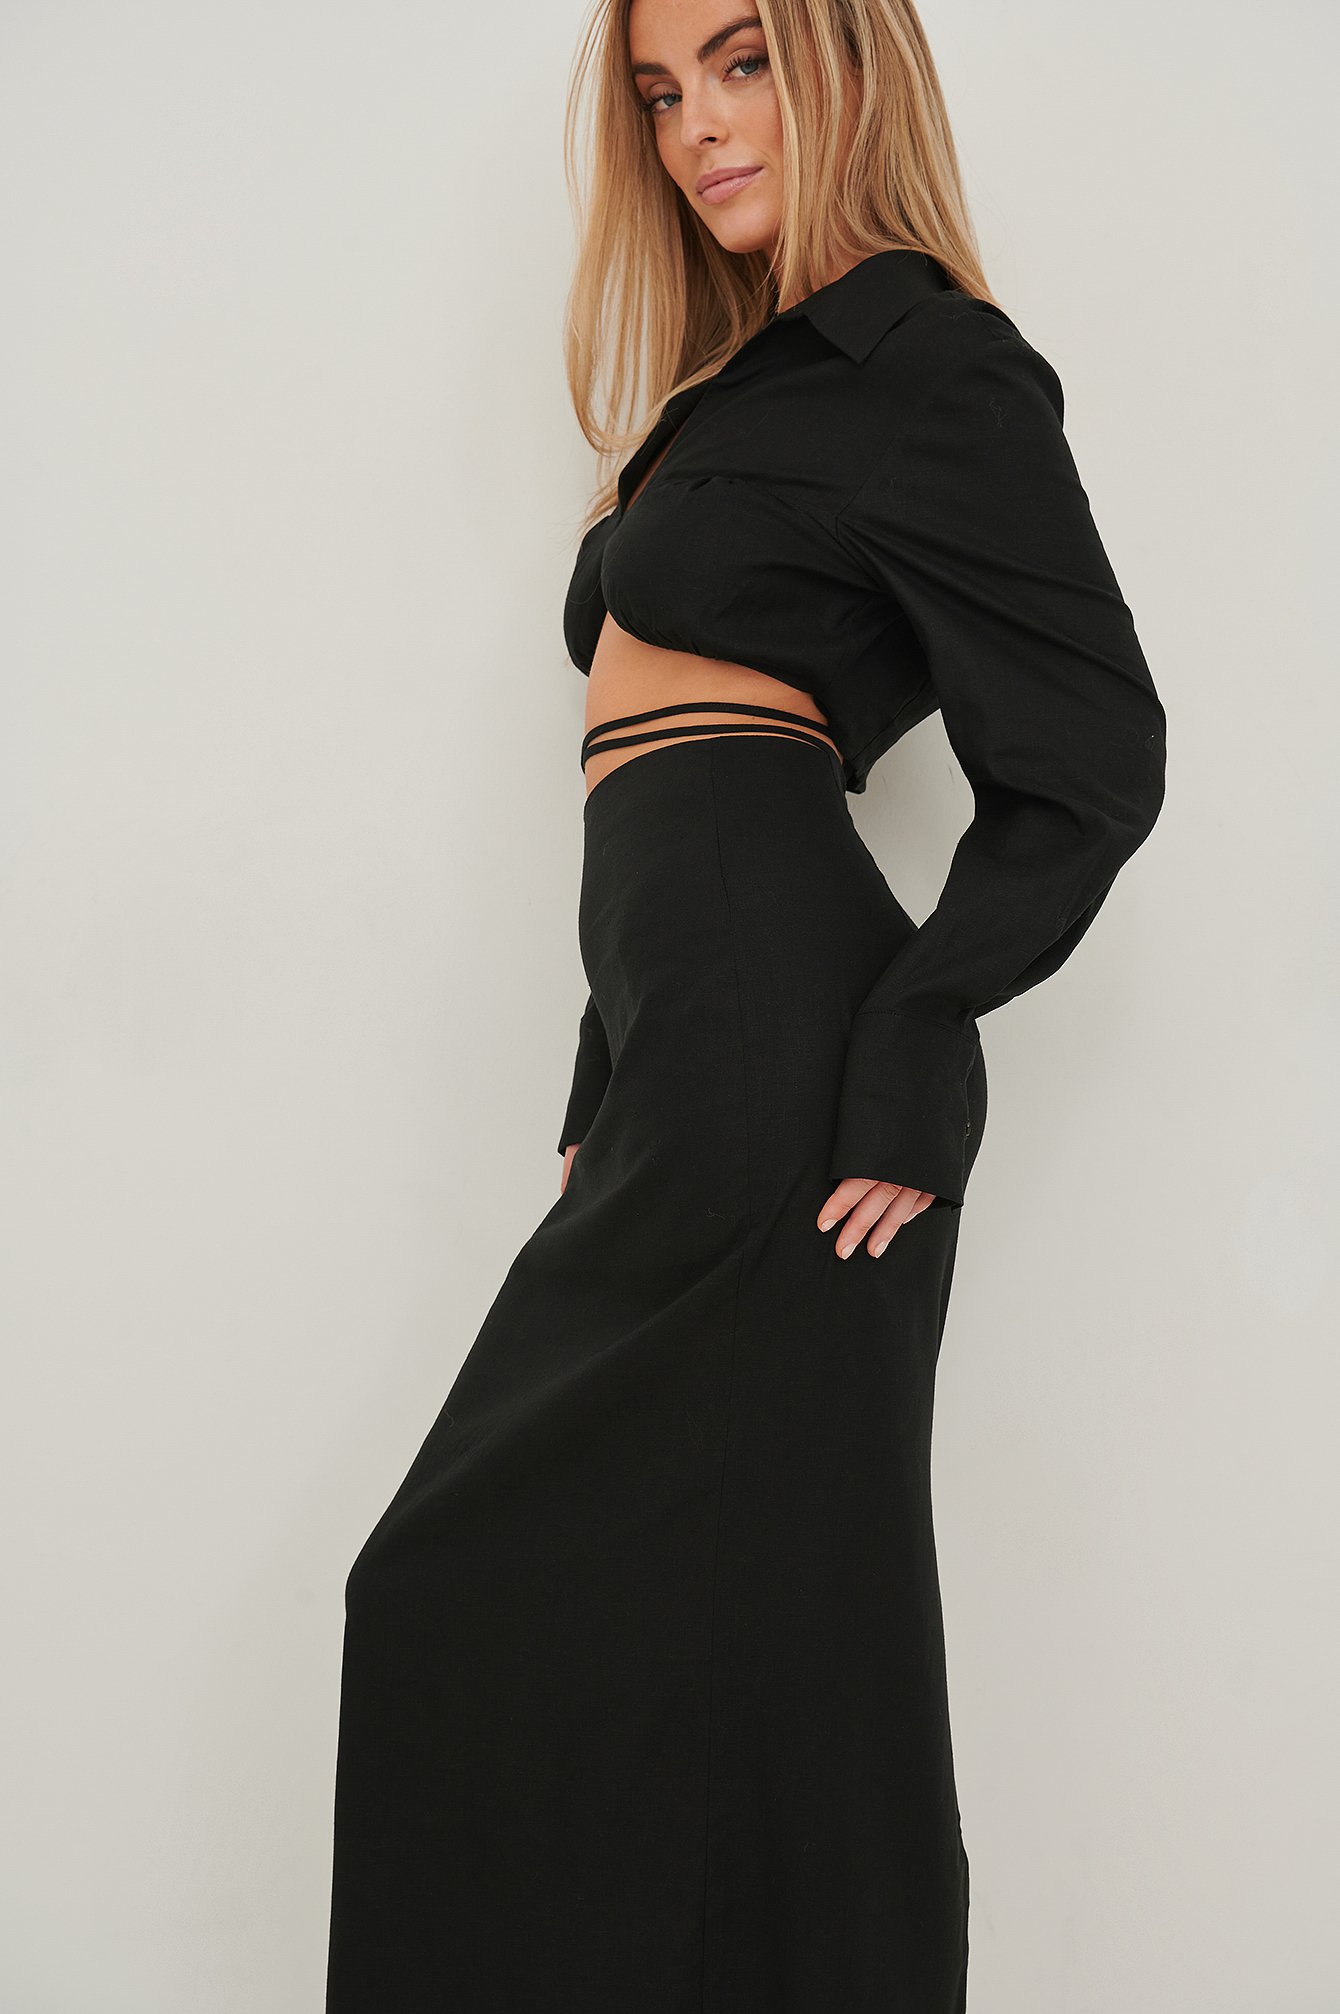 Florence Skirt - Maxi pencil skirt in black - Frey Tailored